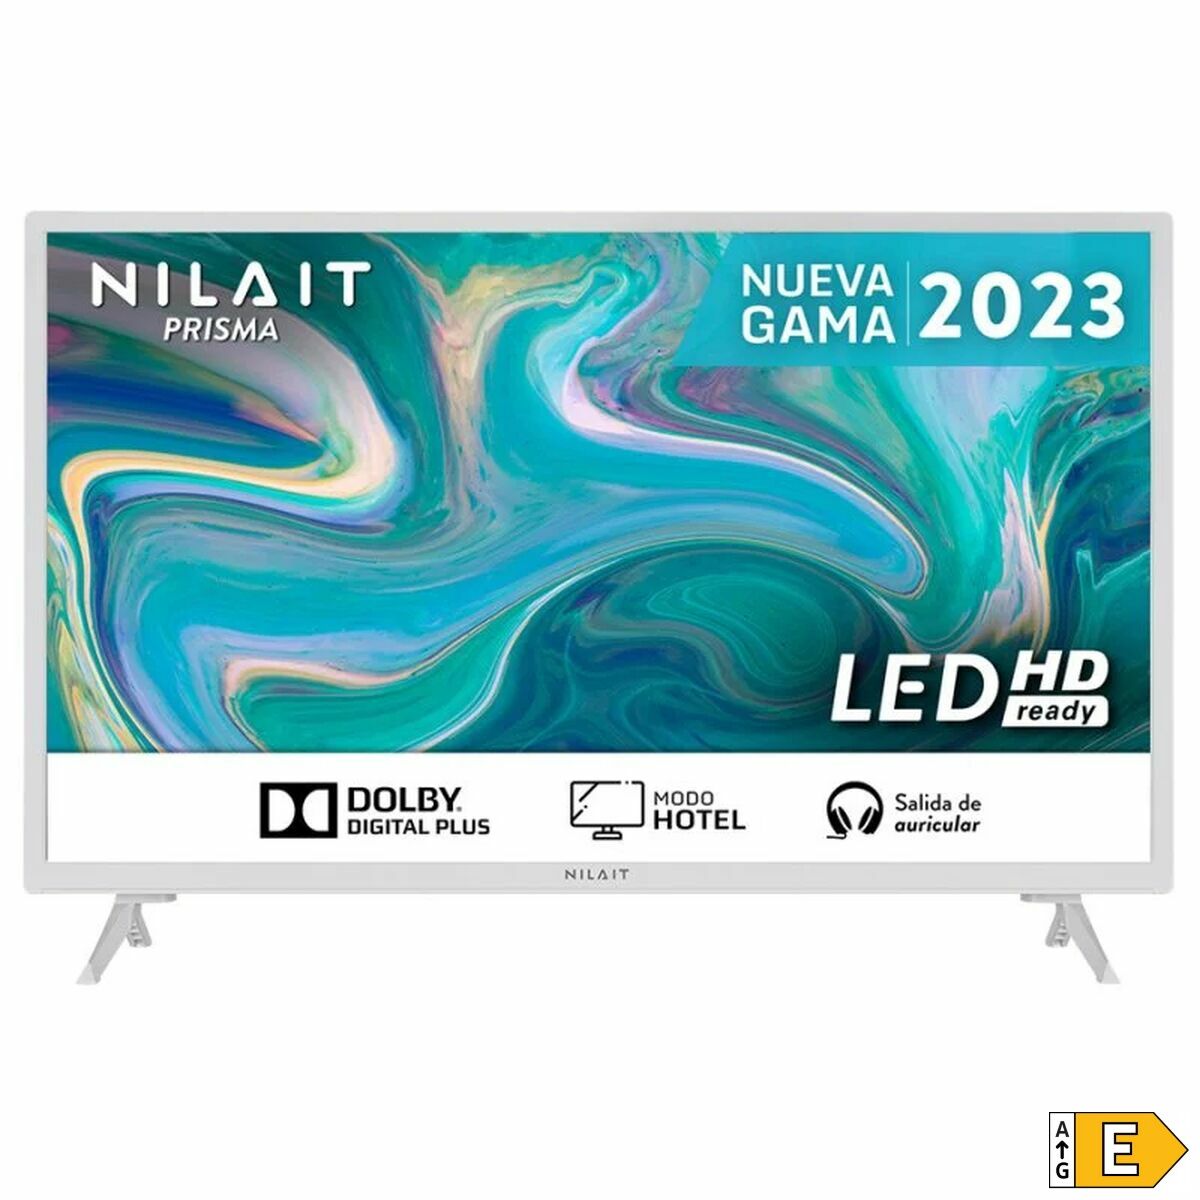 Television Nilait Prisma NI-32HB7001NW 32", Nilait, Electronics, TV, Video and home cinema, television-nilait-prisma-ni-32hb7001nw-32, :Ultra HD, Brand_Nilait, category-reference-2609, category-reference-2625, category-reference-2931, category-reference-t-18805, category-reference-t-19653, cinema and television, Condition_NEW, entertainment, Price_300 - 400, RiotNook